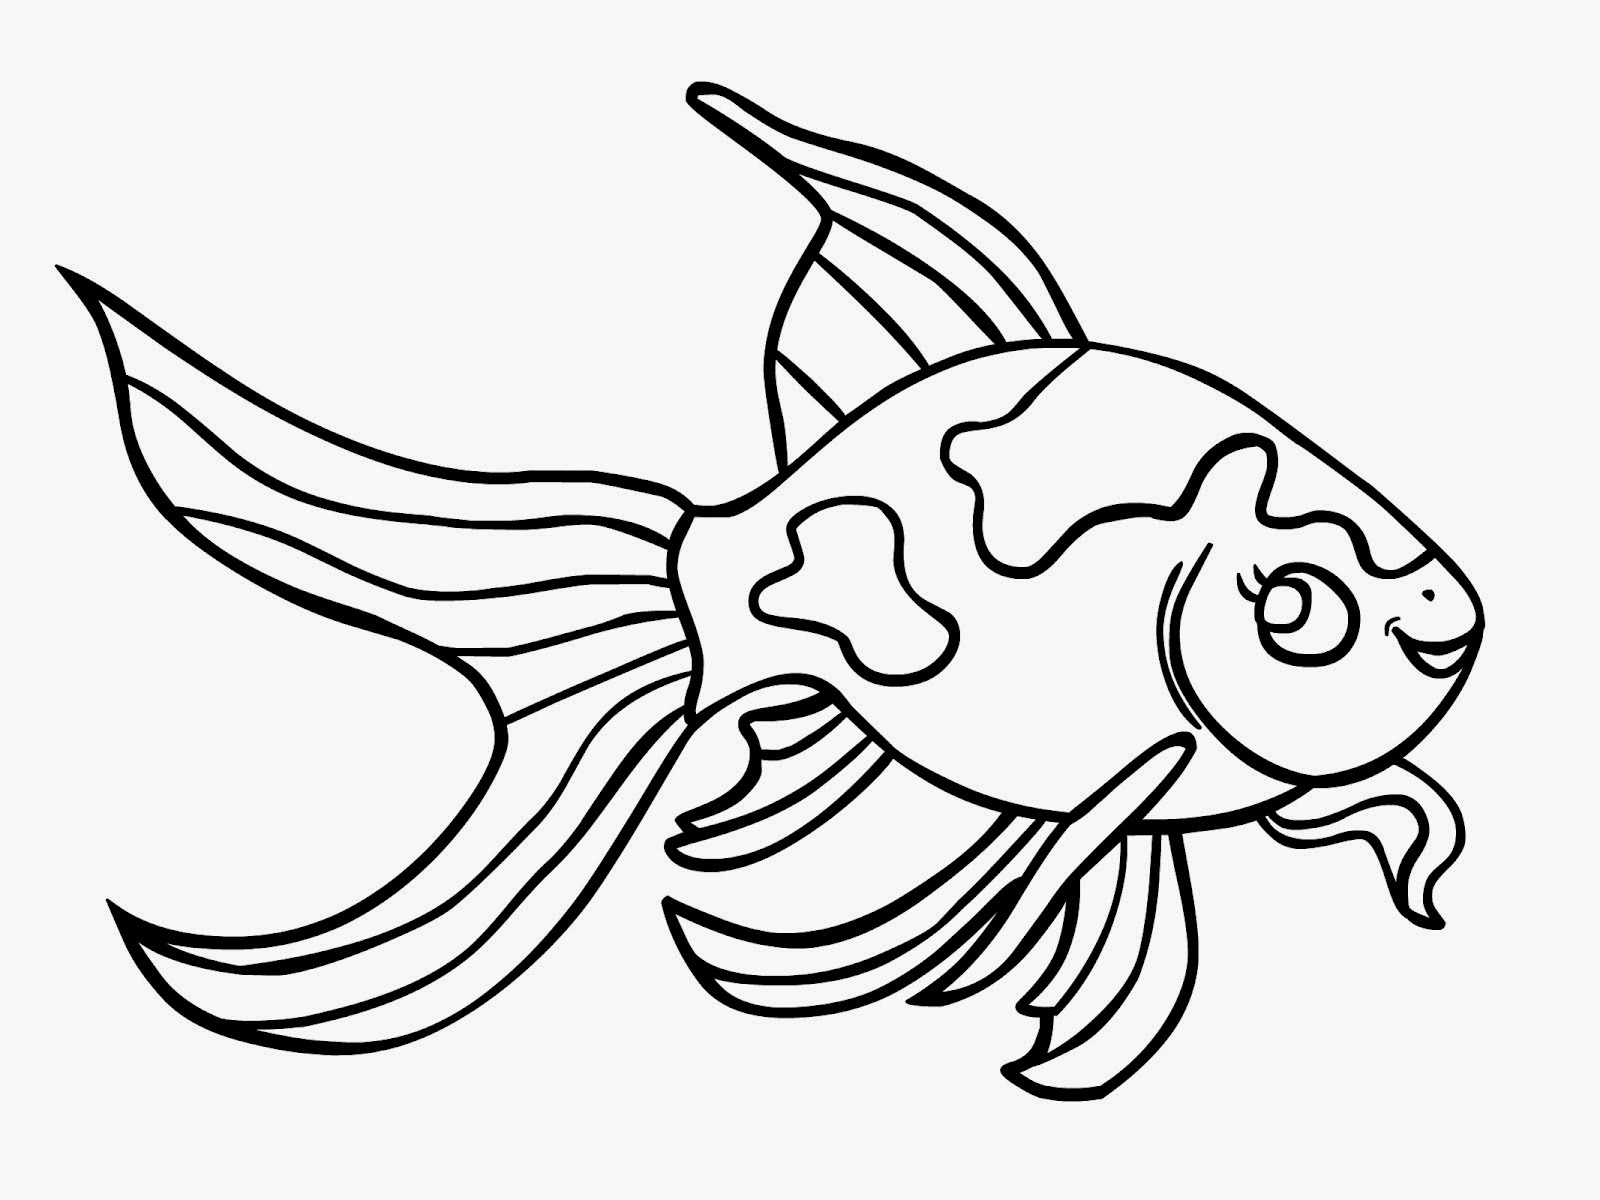 Simple Fish Outline - Free Clipart Images